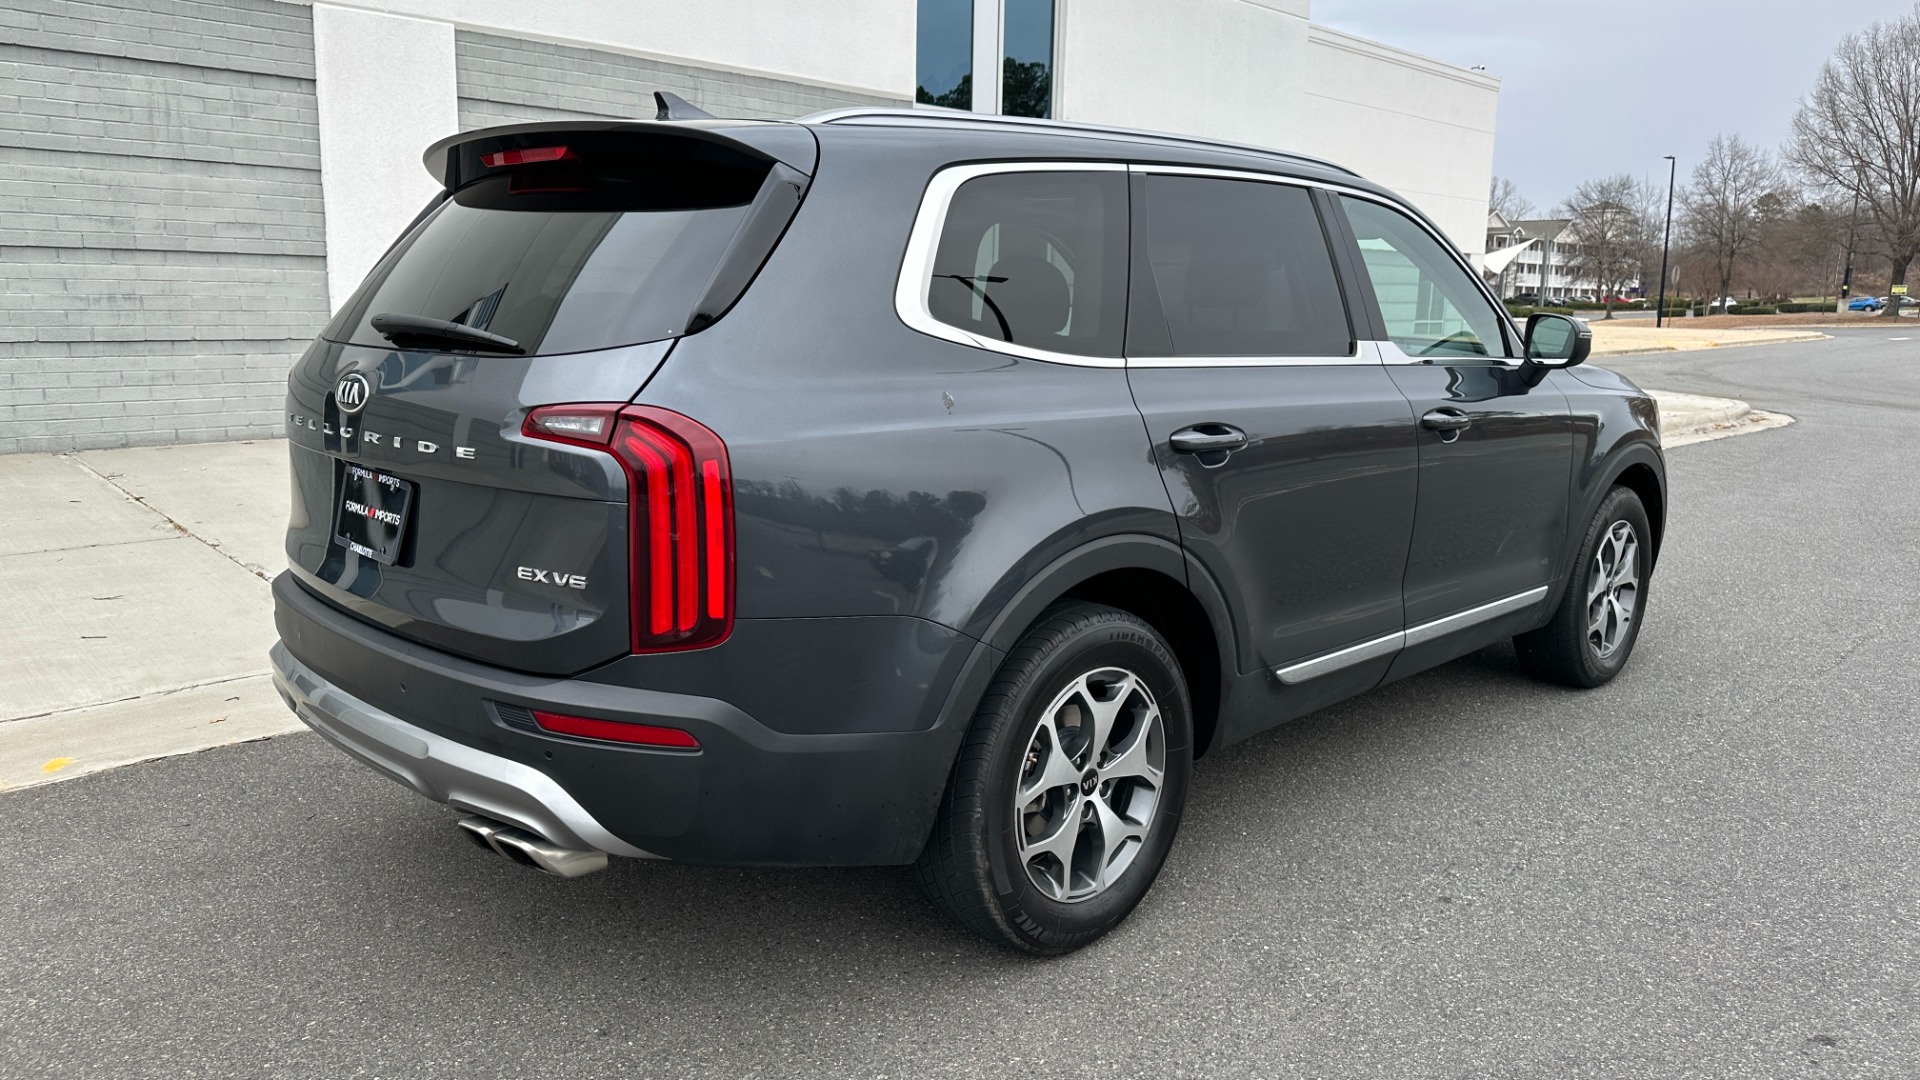 Used 2020 Kia Telluride EX / DRIVER ASSIST / LEATHER / V6 / APPLE CARPLAY / REARVIEW / 3 ROW for sale $31,695 at Formula Imports in Charlotte NC 28227 7